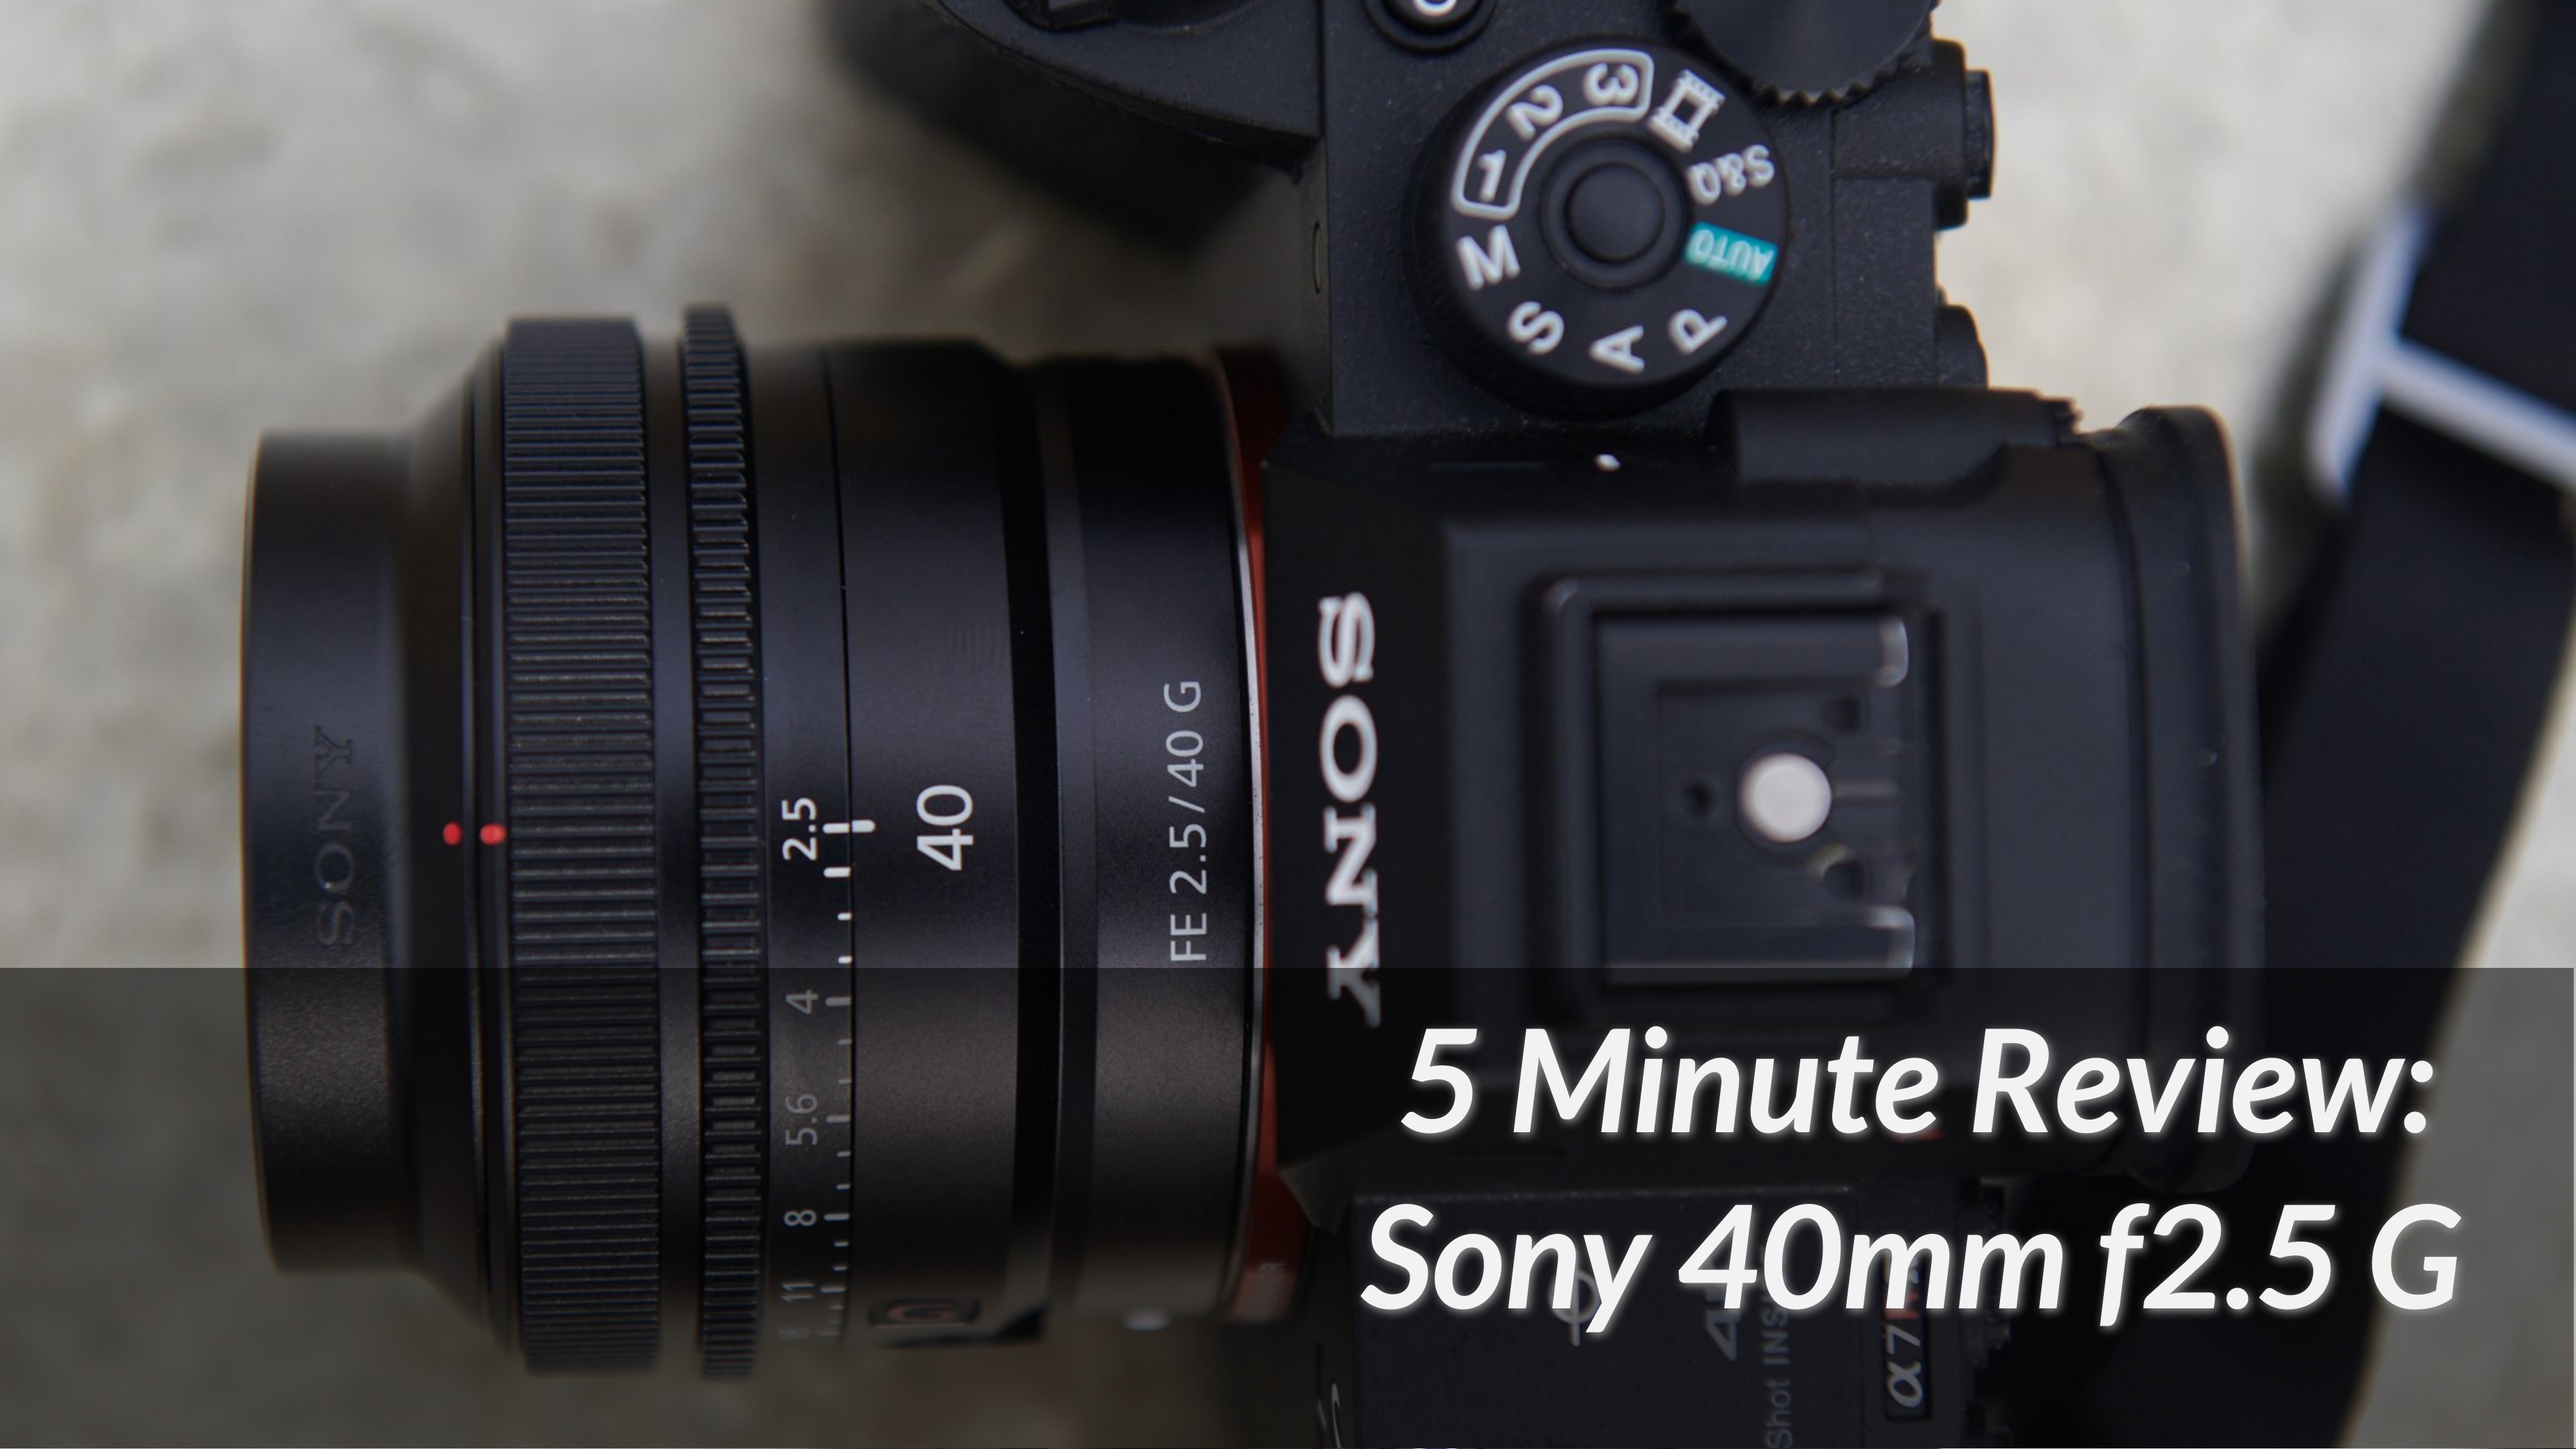 5-Minute-Review-Sony-40mm-f2.5-G (1)